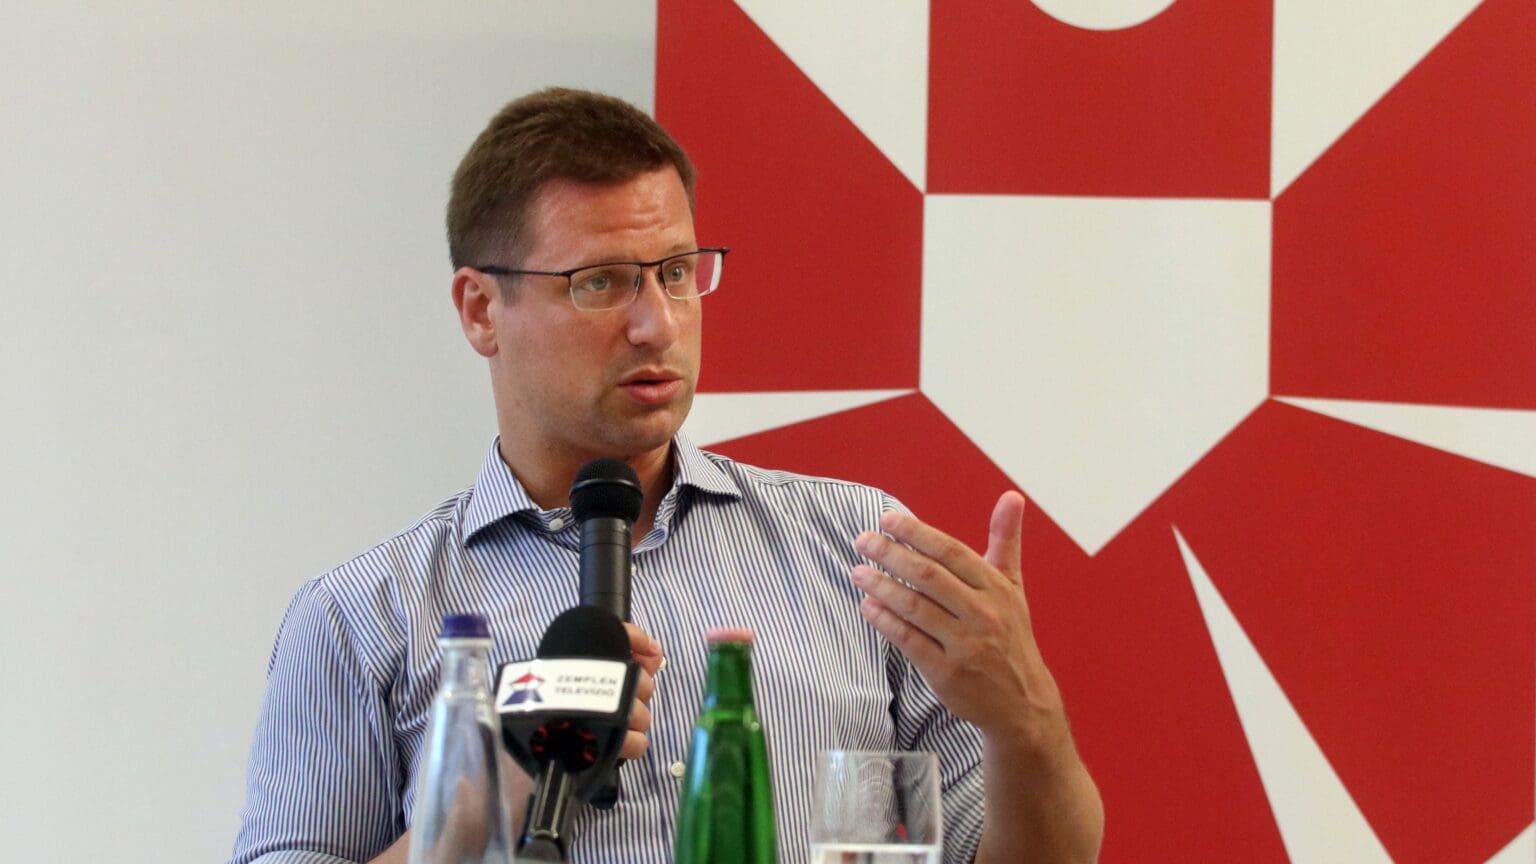 Gergely Gulyás: Despite the Hardships of Last Year, Hungary’s Security Was Protected